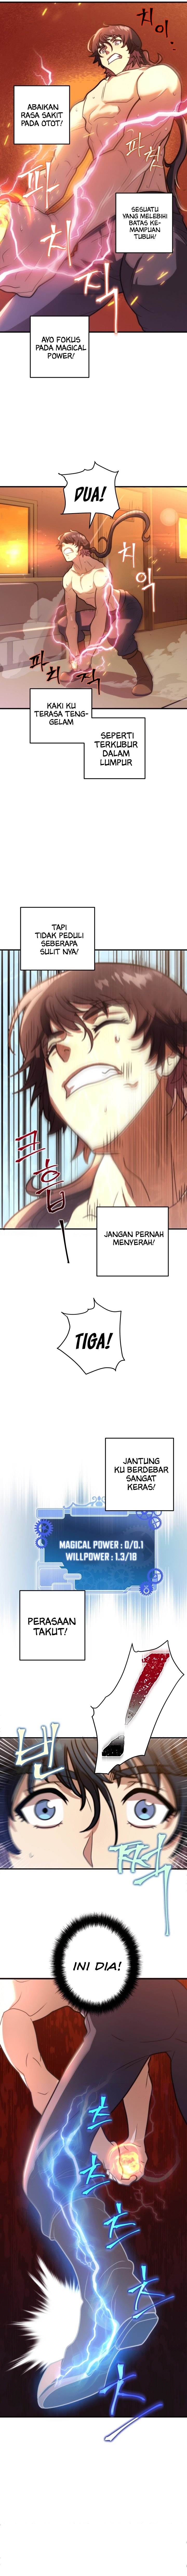 1RM’s Gigant Rider Chapter 2